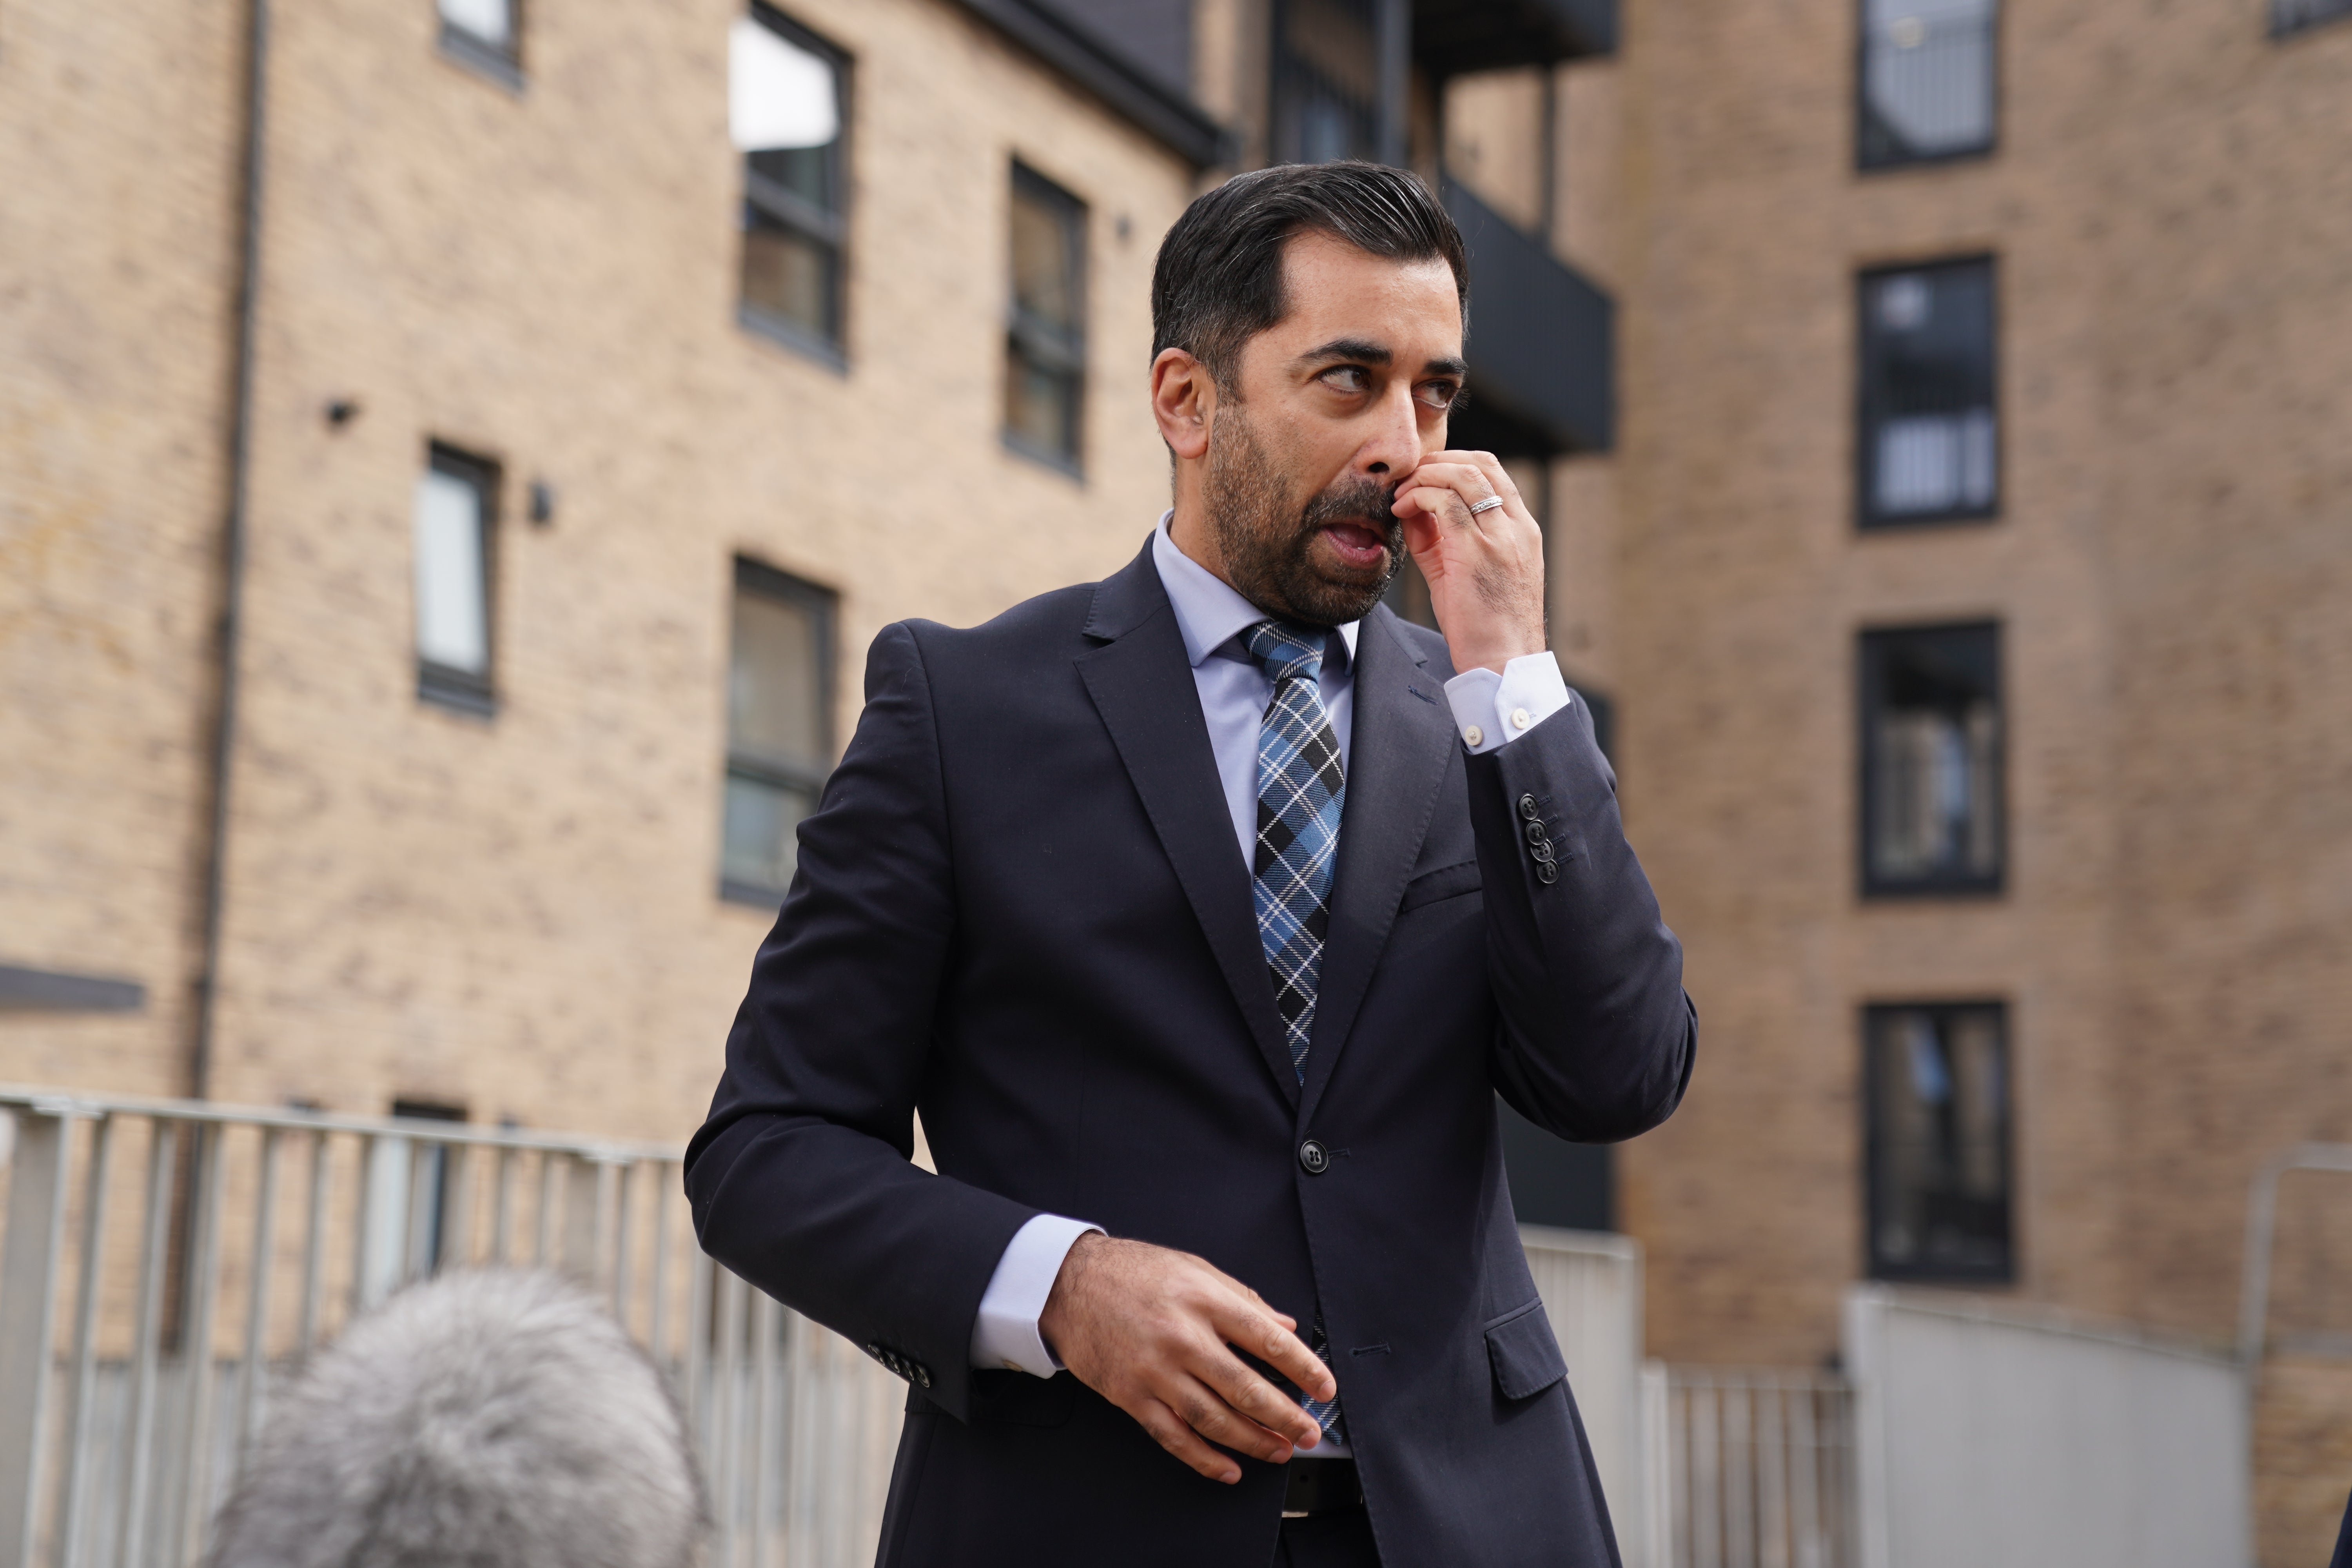 Humza Yousaf announced his resignation during a press conference